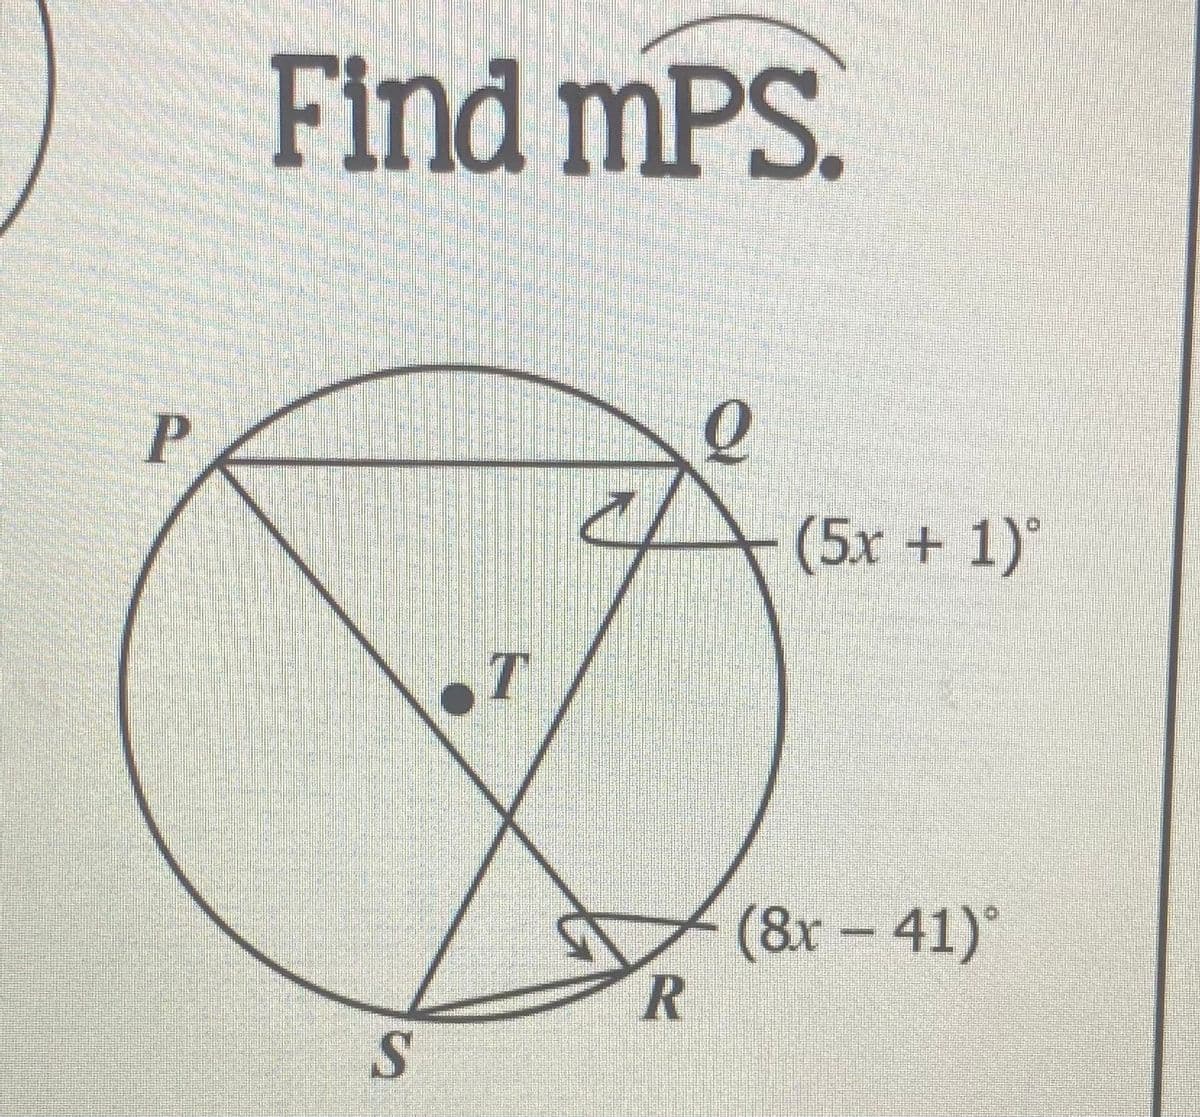 Find mPS.
(5x + 1)°
(8x - 41)
